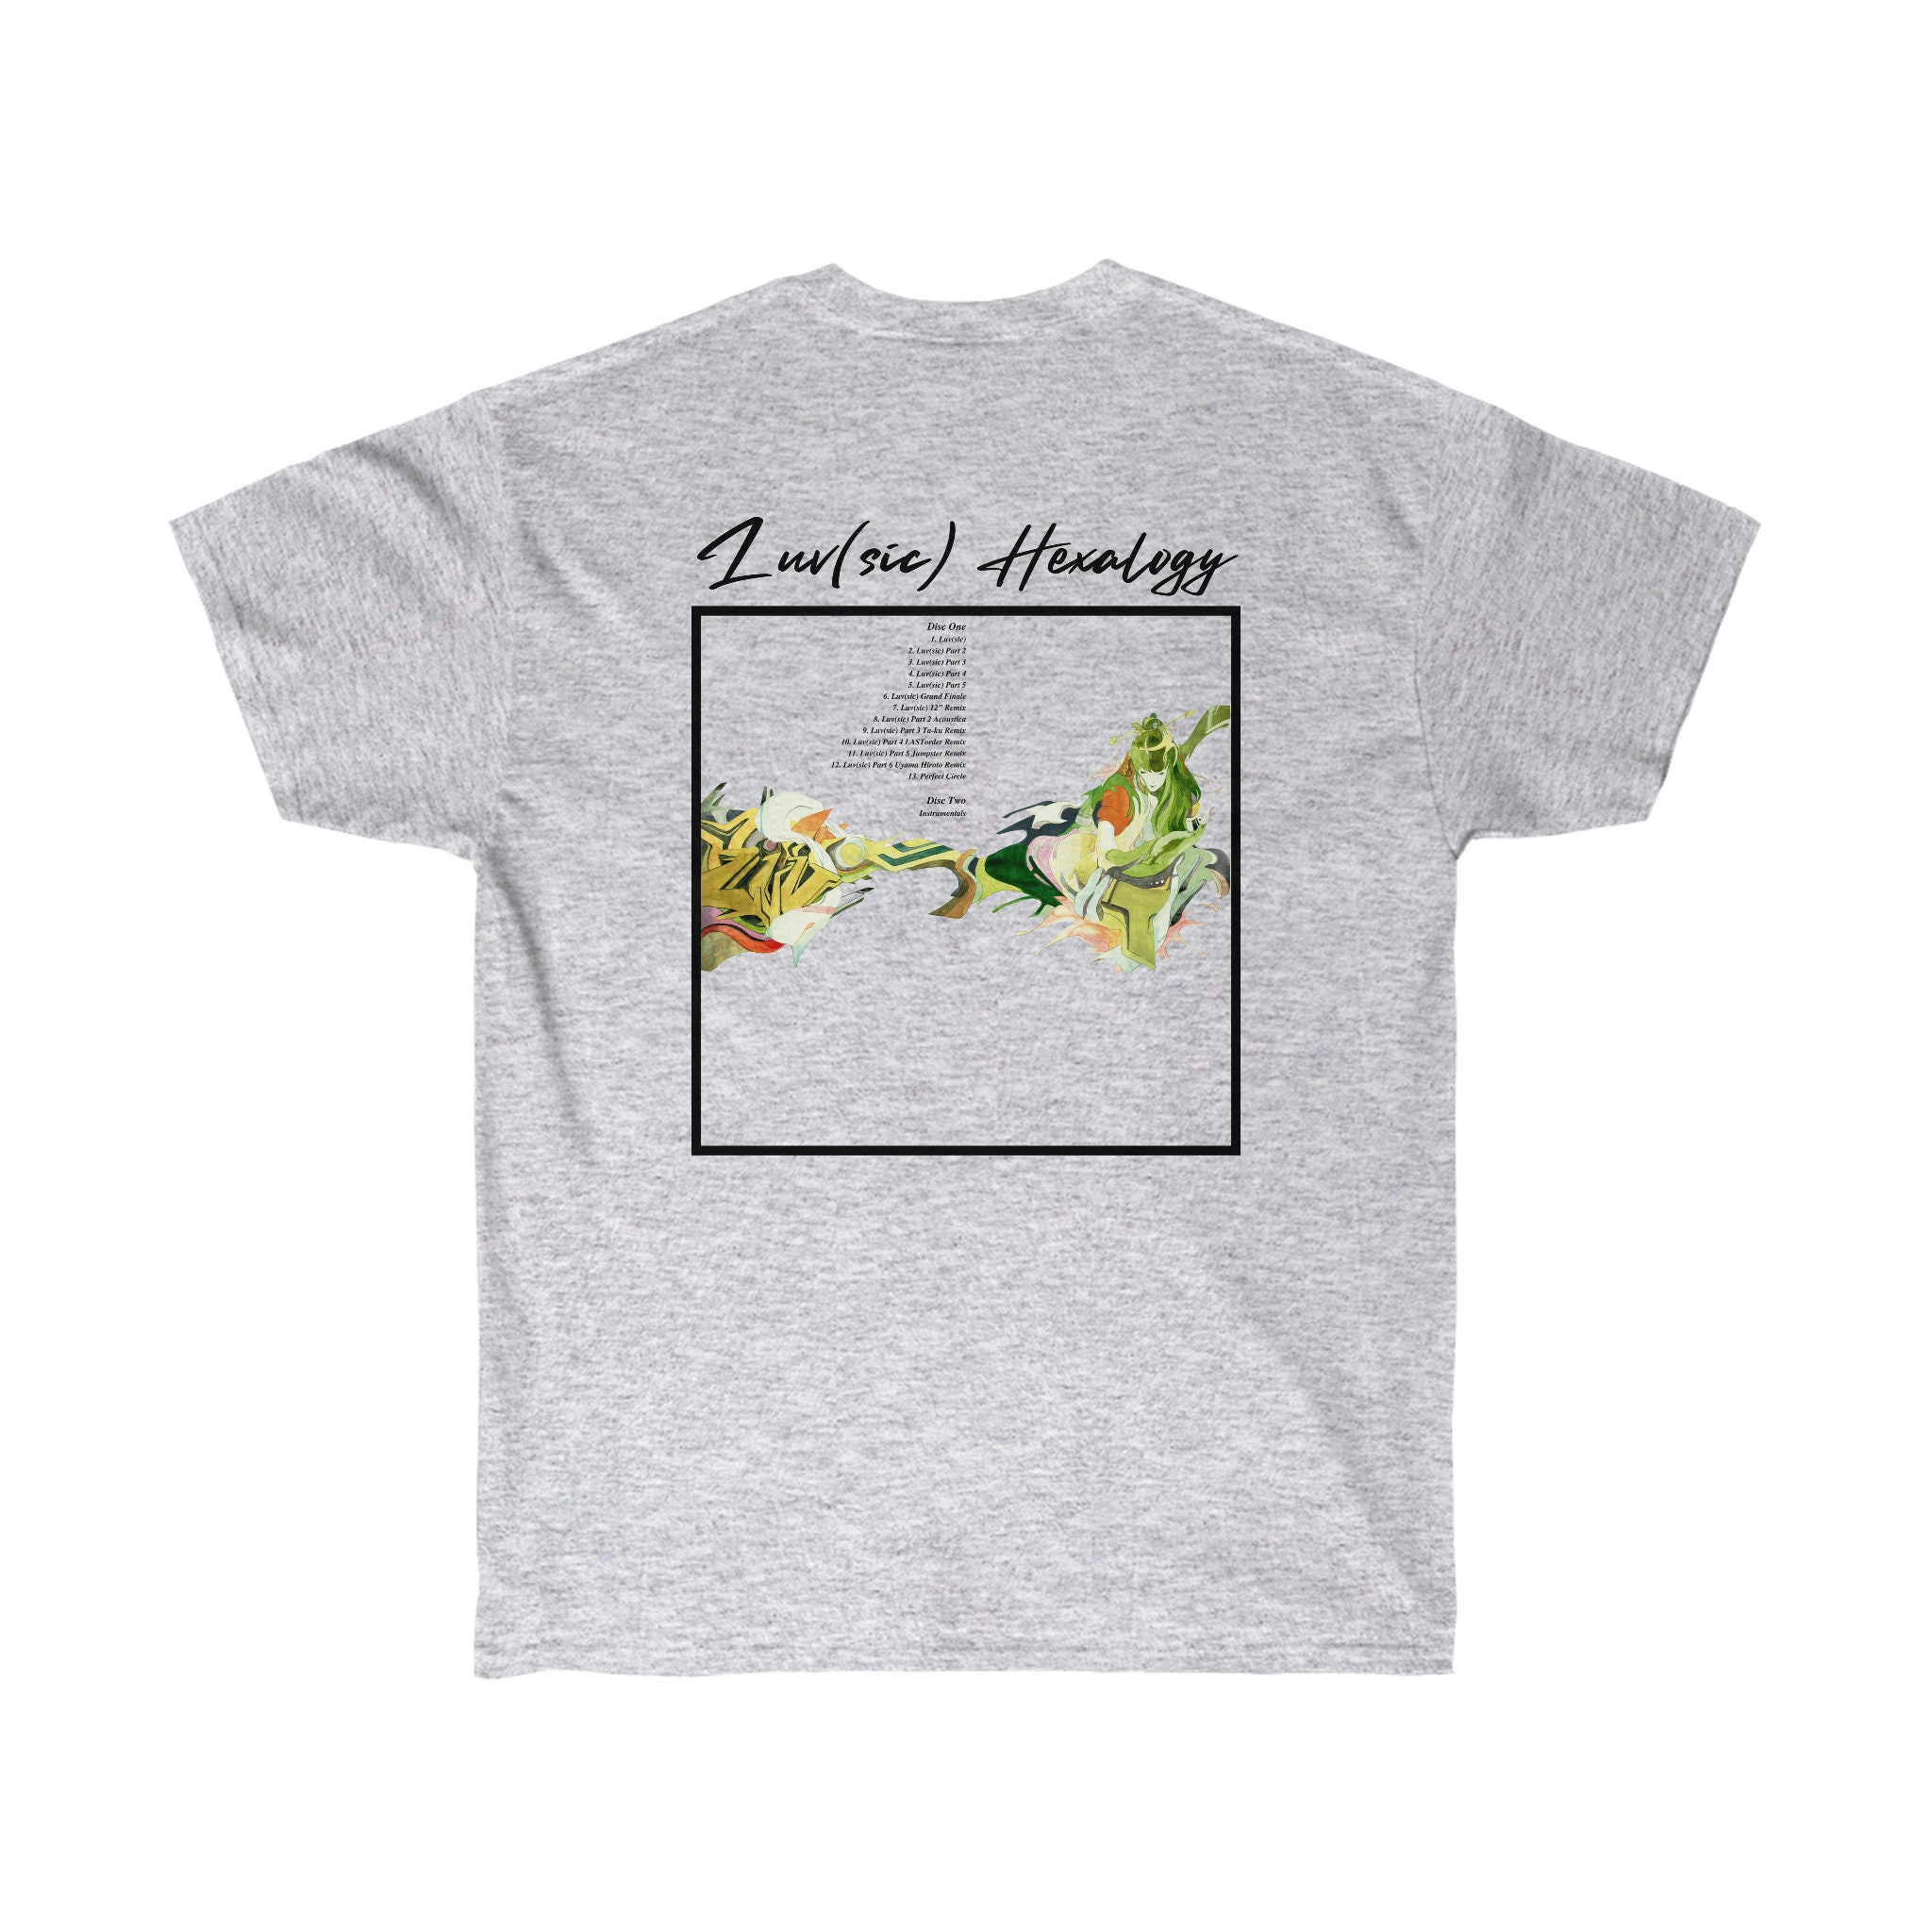 Nujabes Luv Sic Hexalogy Tracklist T shirt Pocket and Back   Etsy